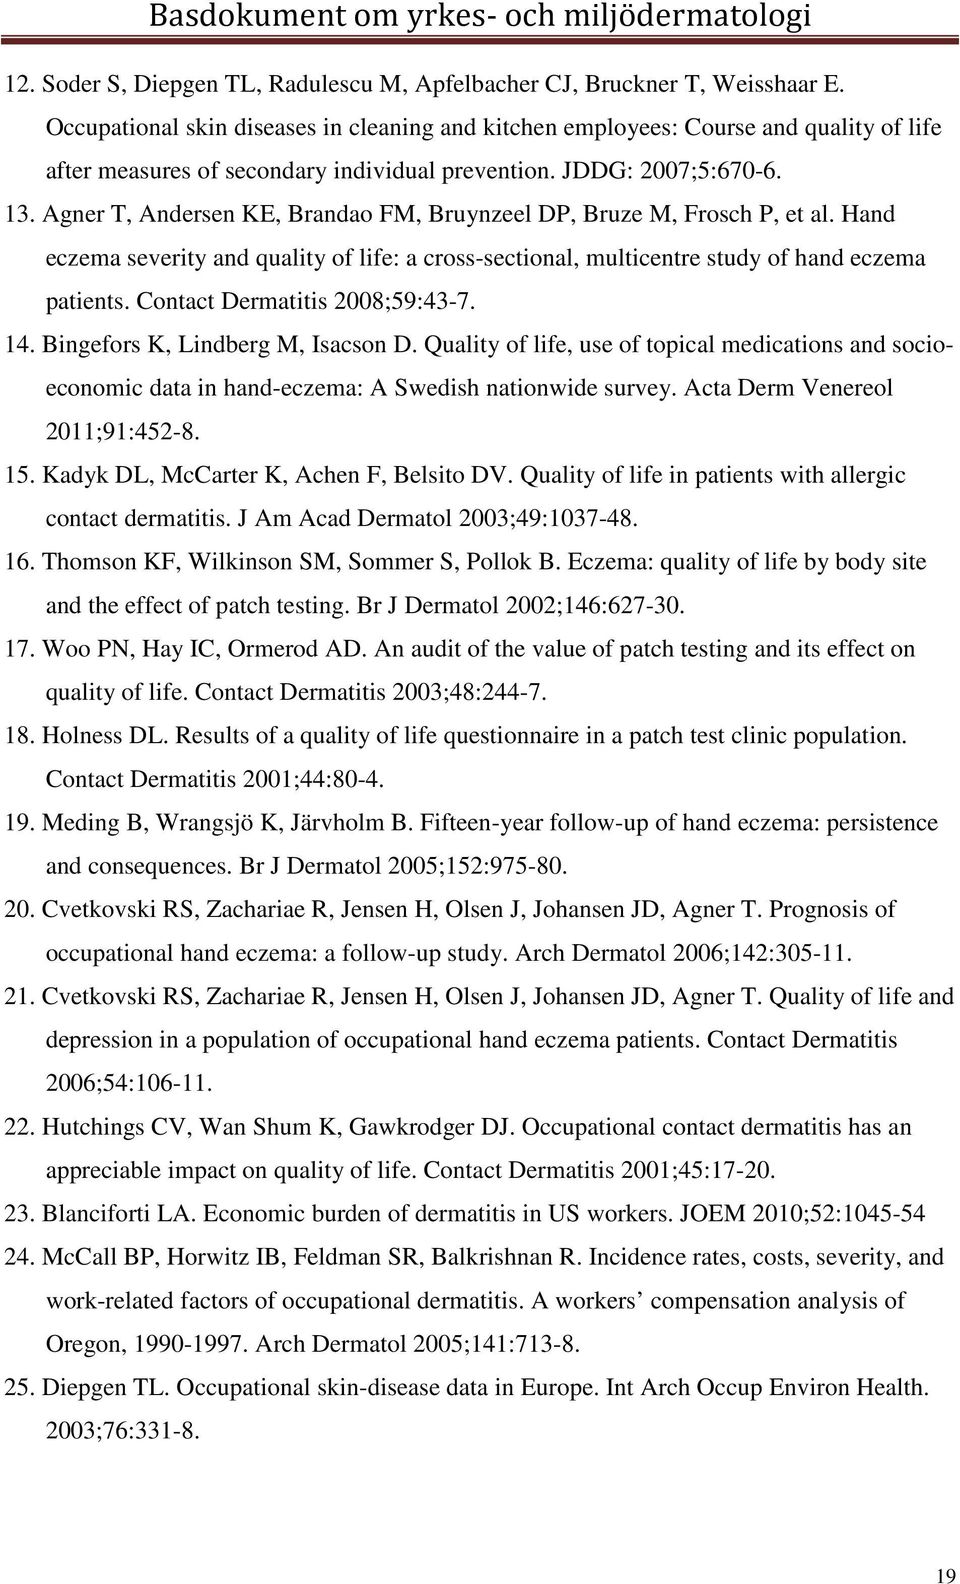 Agner T, Andersen KE, Brandao FM, Bruynzeel DP, Bruze M, Frosch P, et al. Hand eczema severity and quality of life: a cross-sectional, multicentre study of hand eczema patients.